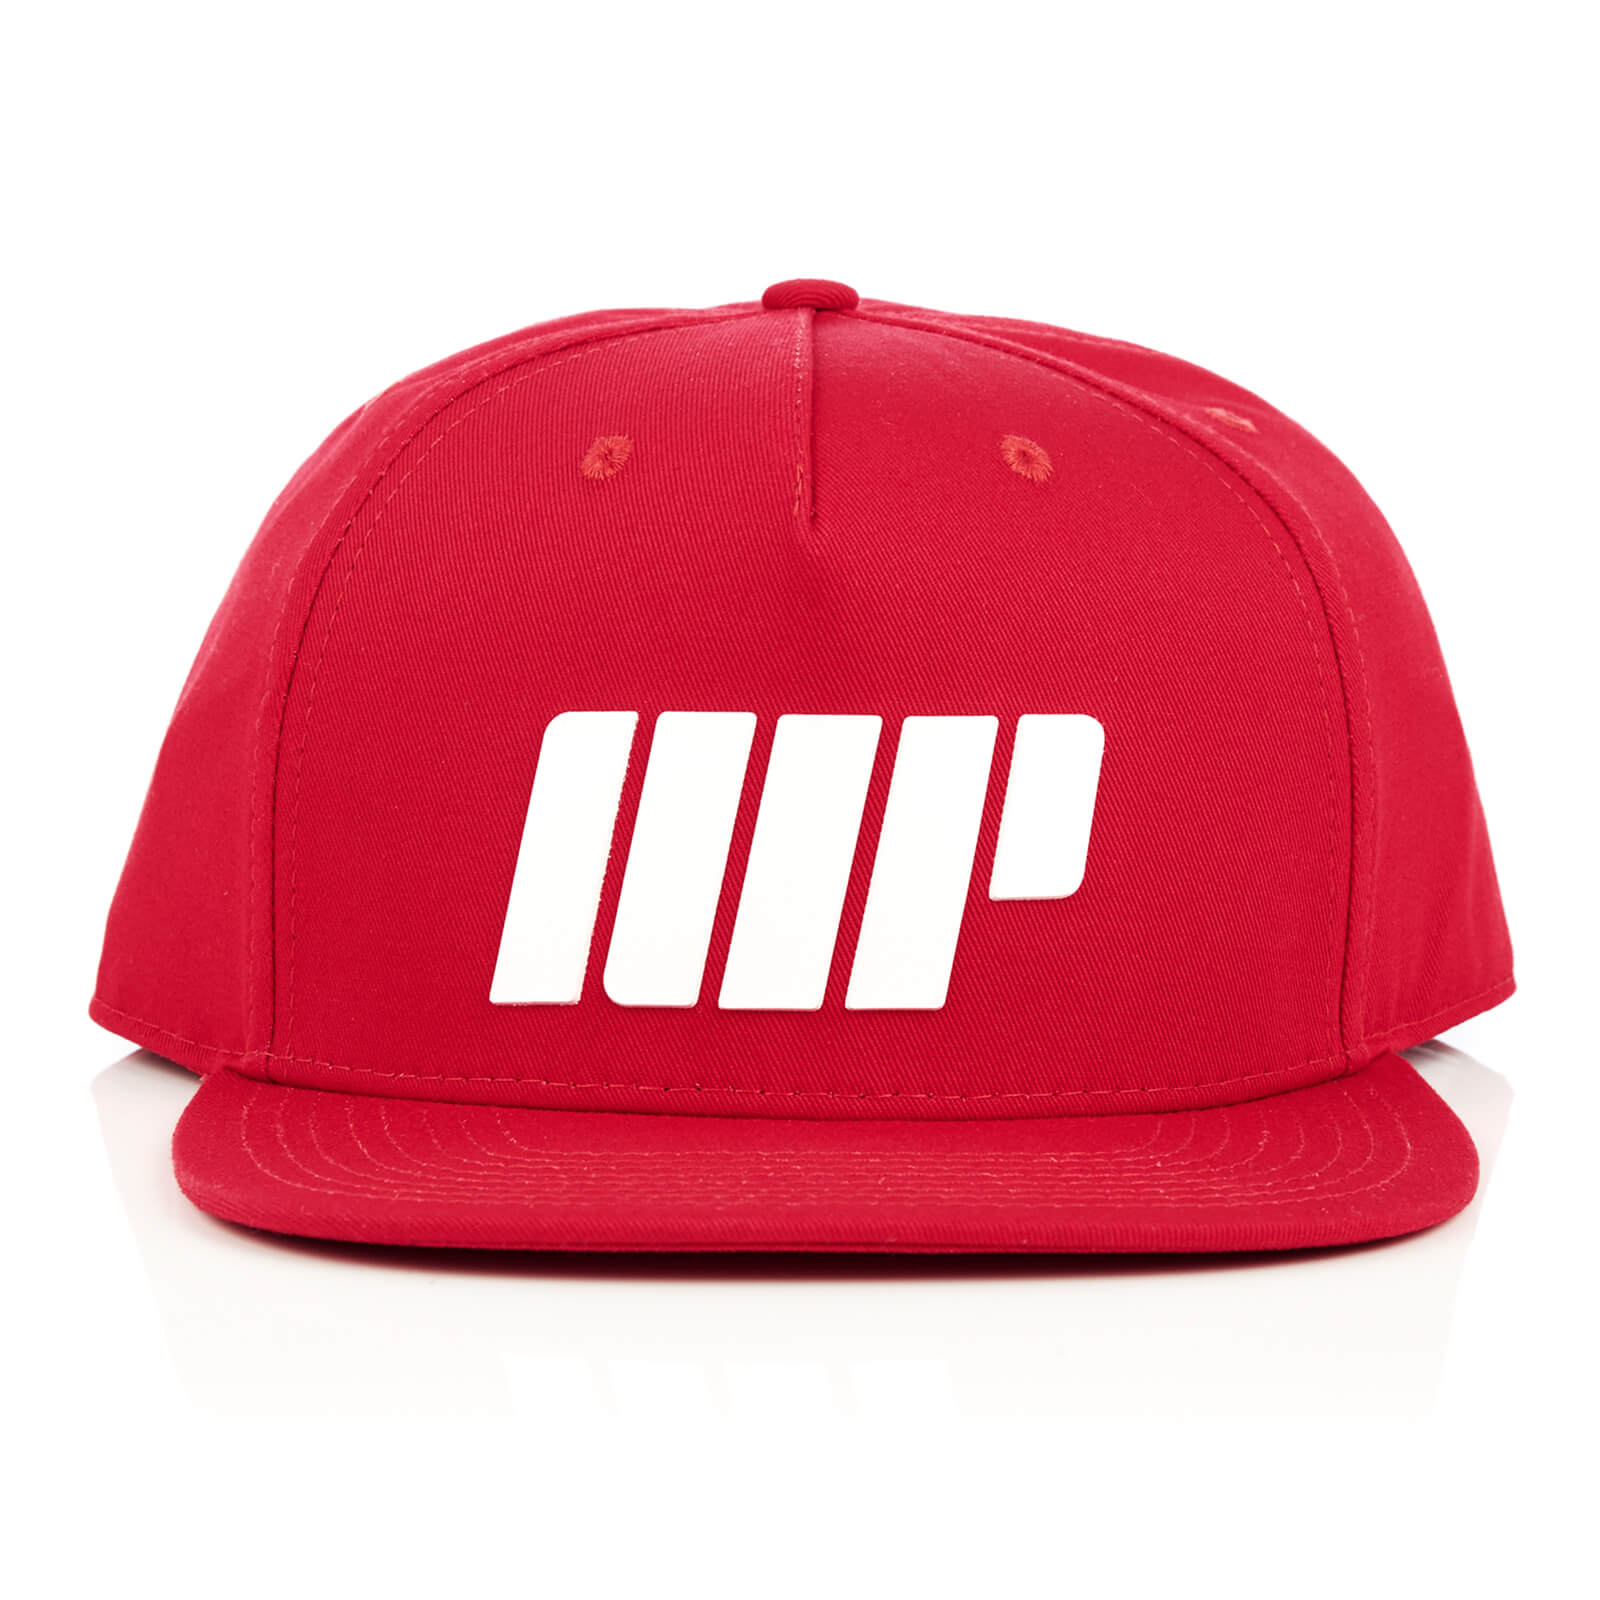 MP Snapback - Red